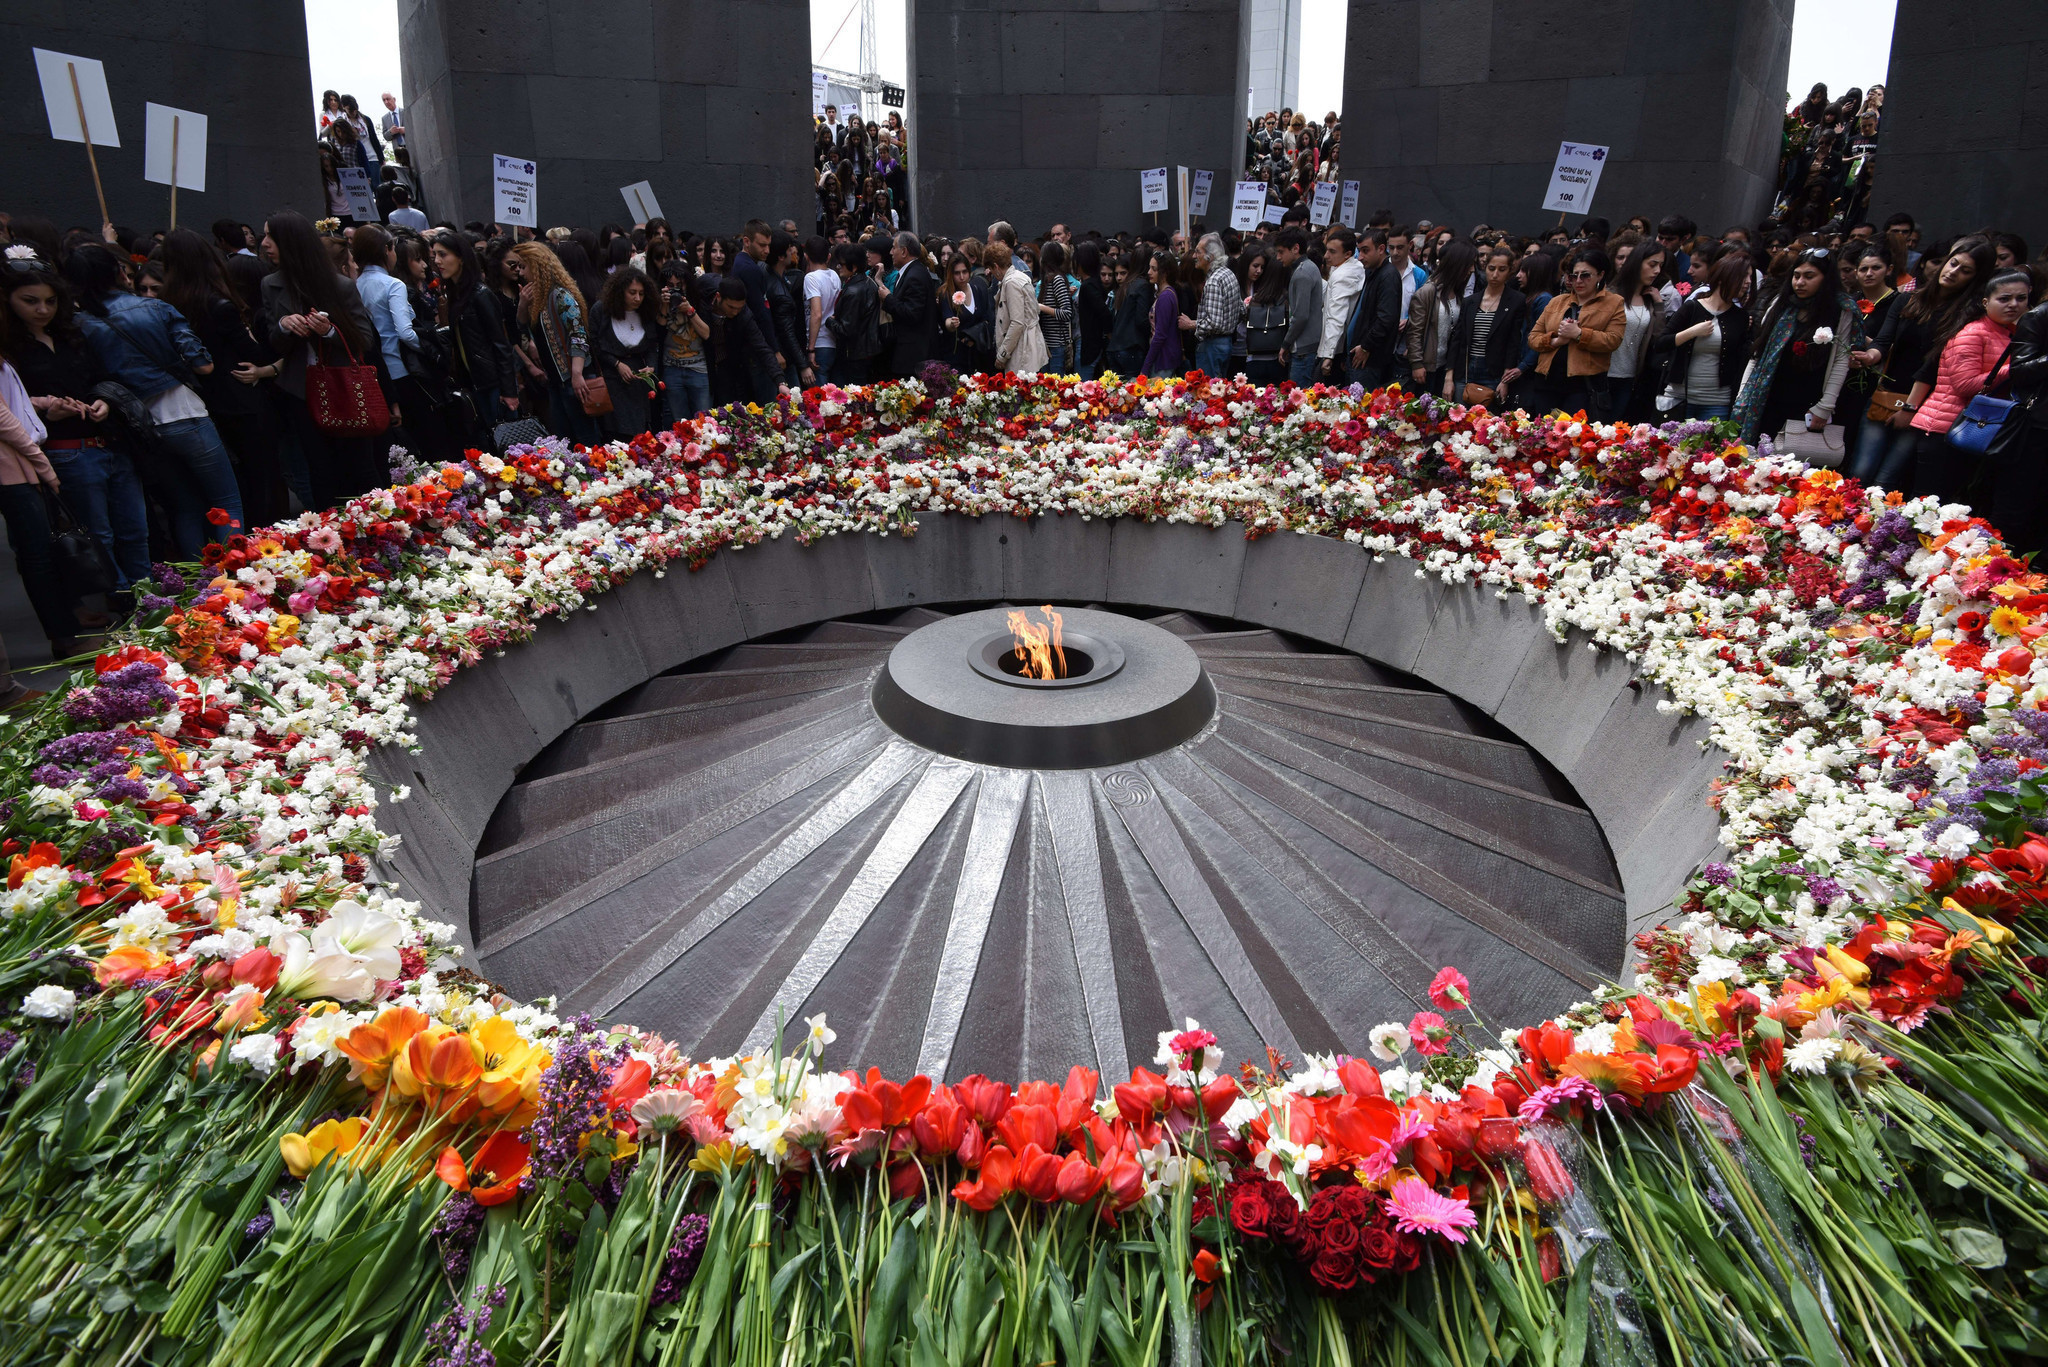 Obama won't use term 'genocide' at 100th anniversary commemoration of Armenian massacres